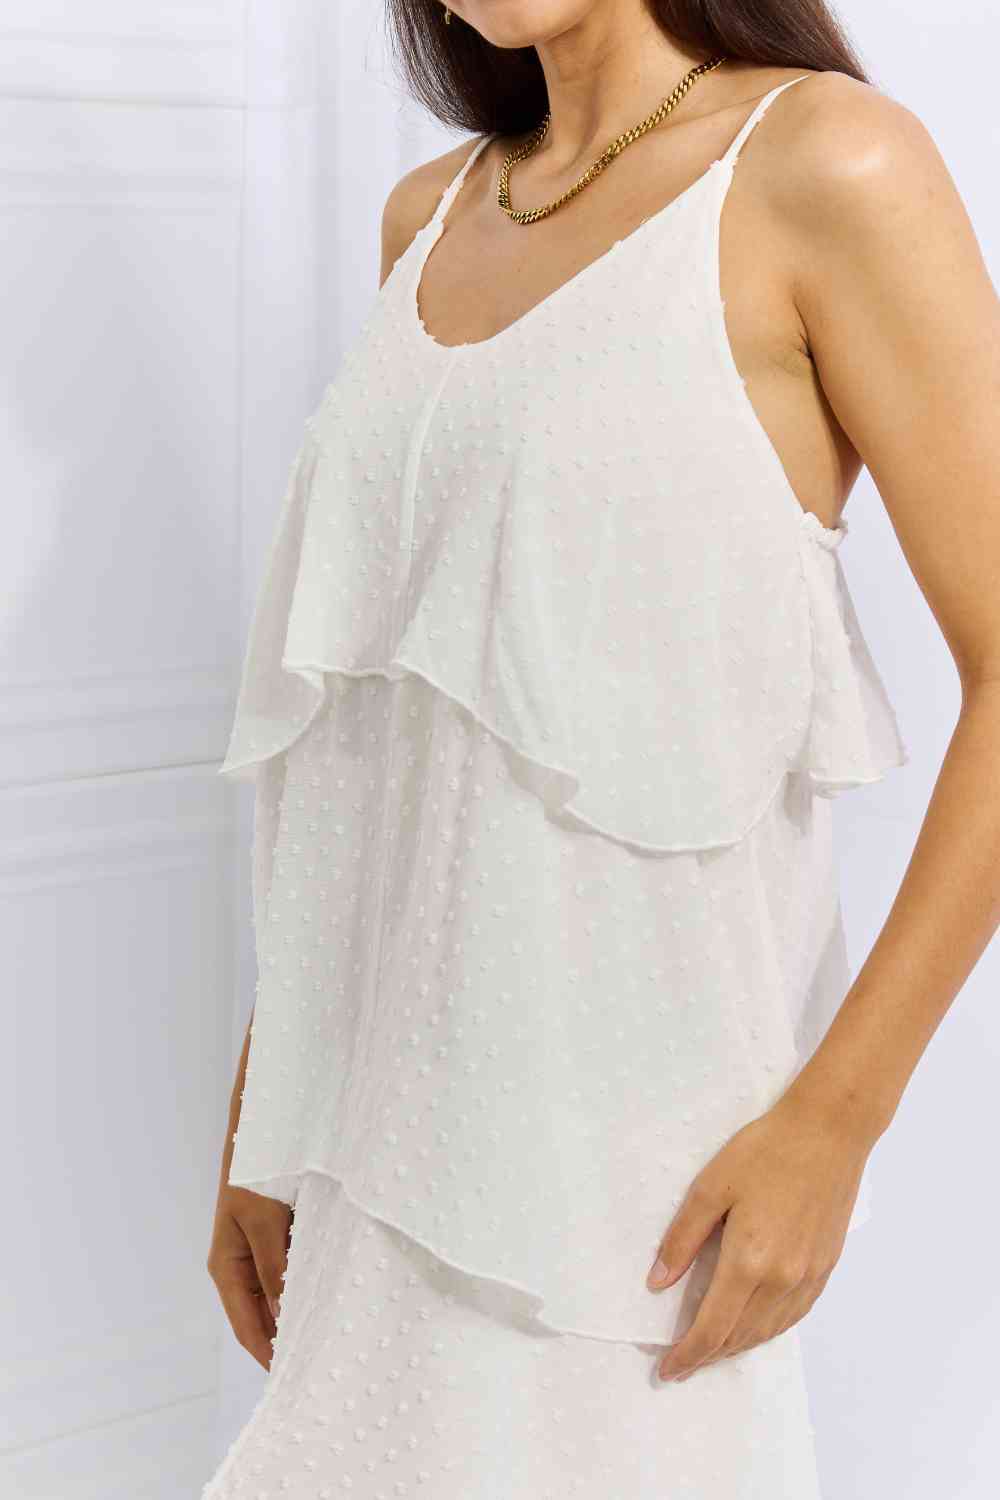 Light Gray Culture Code By The River Full Size Cascade Ruffle Style Cami Dress in Soft White Clothing